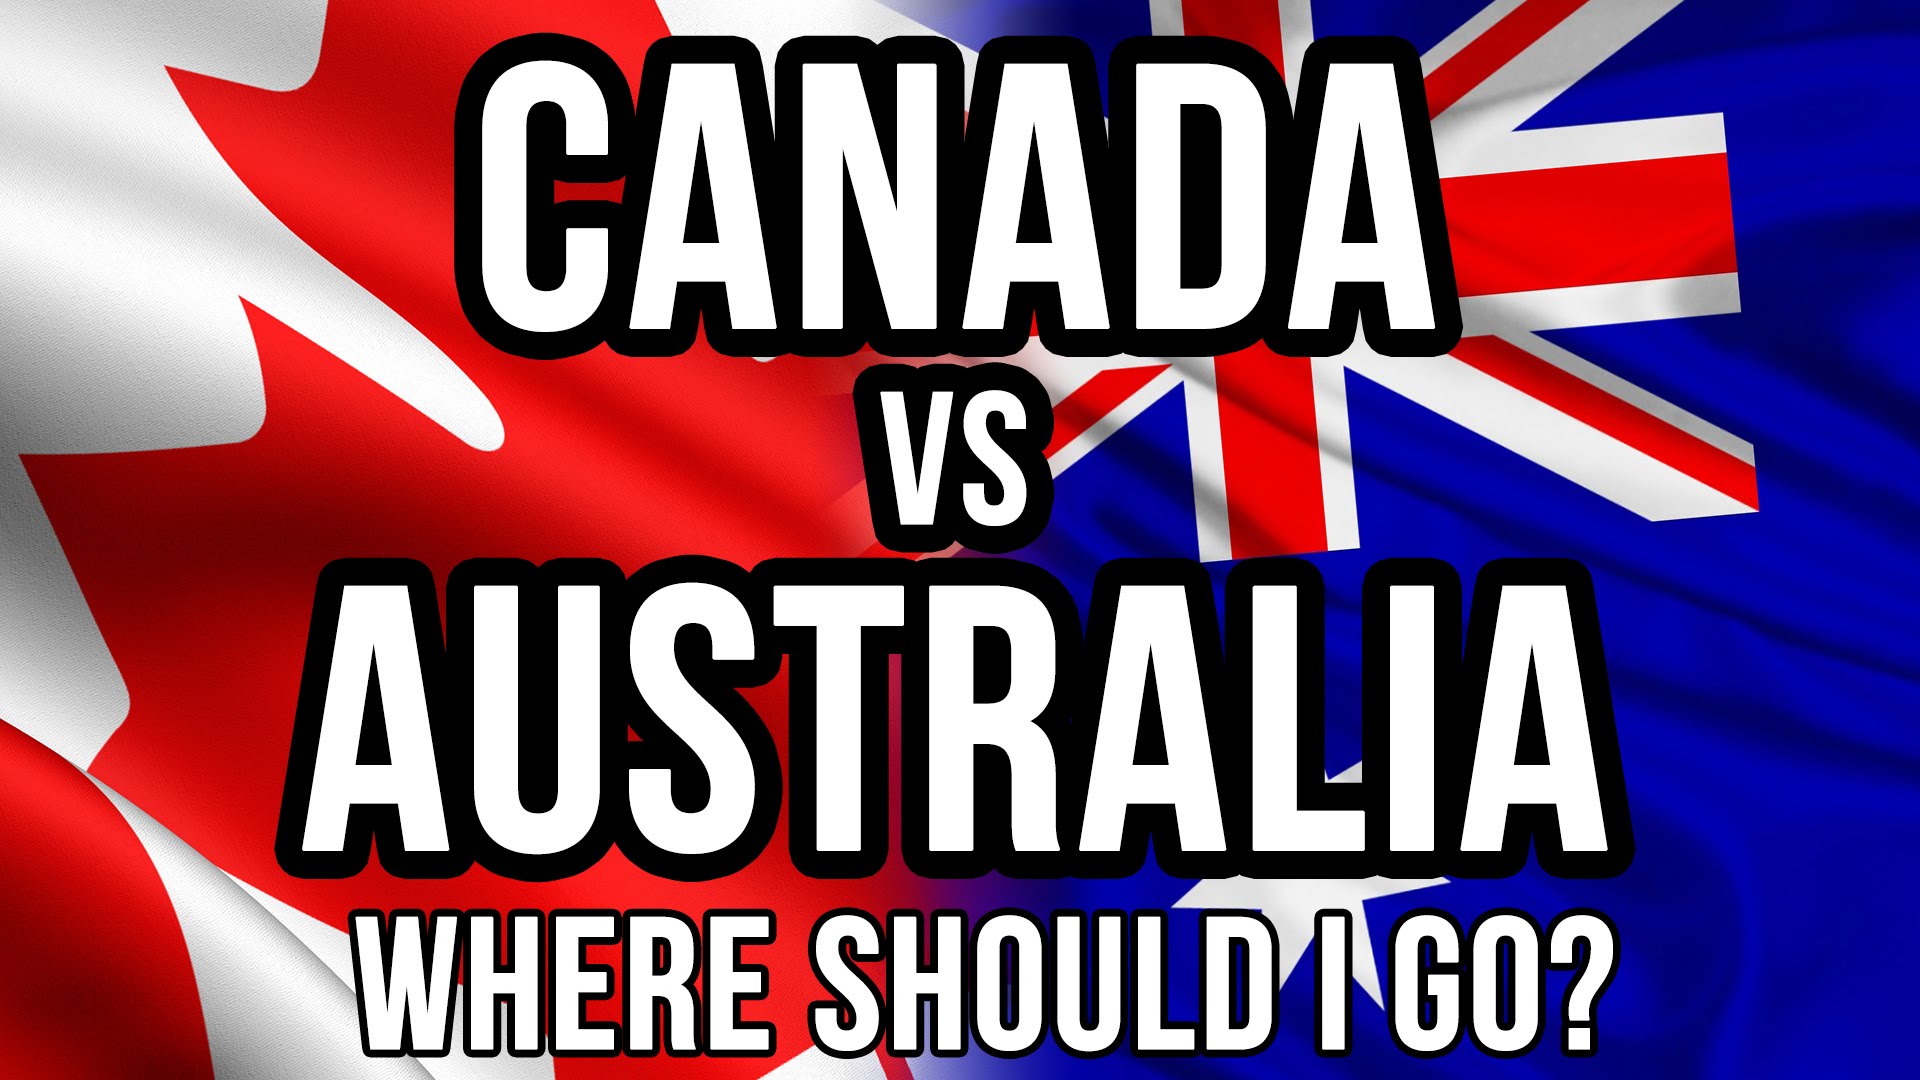 Which is the better country to settle permanently in, Canada or Australia?